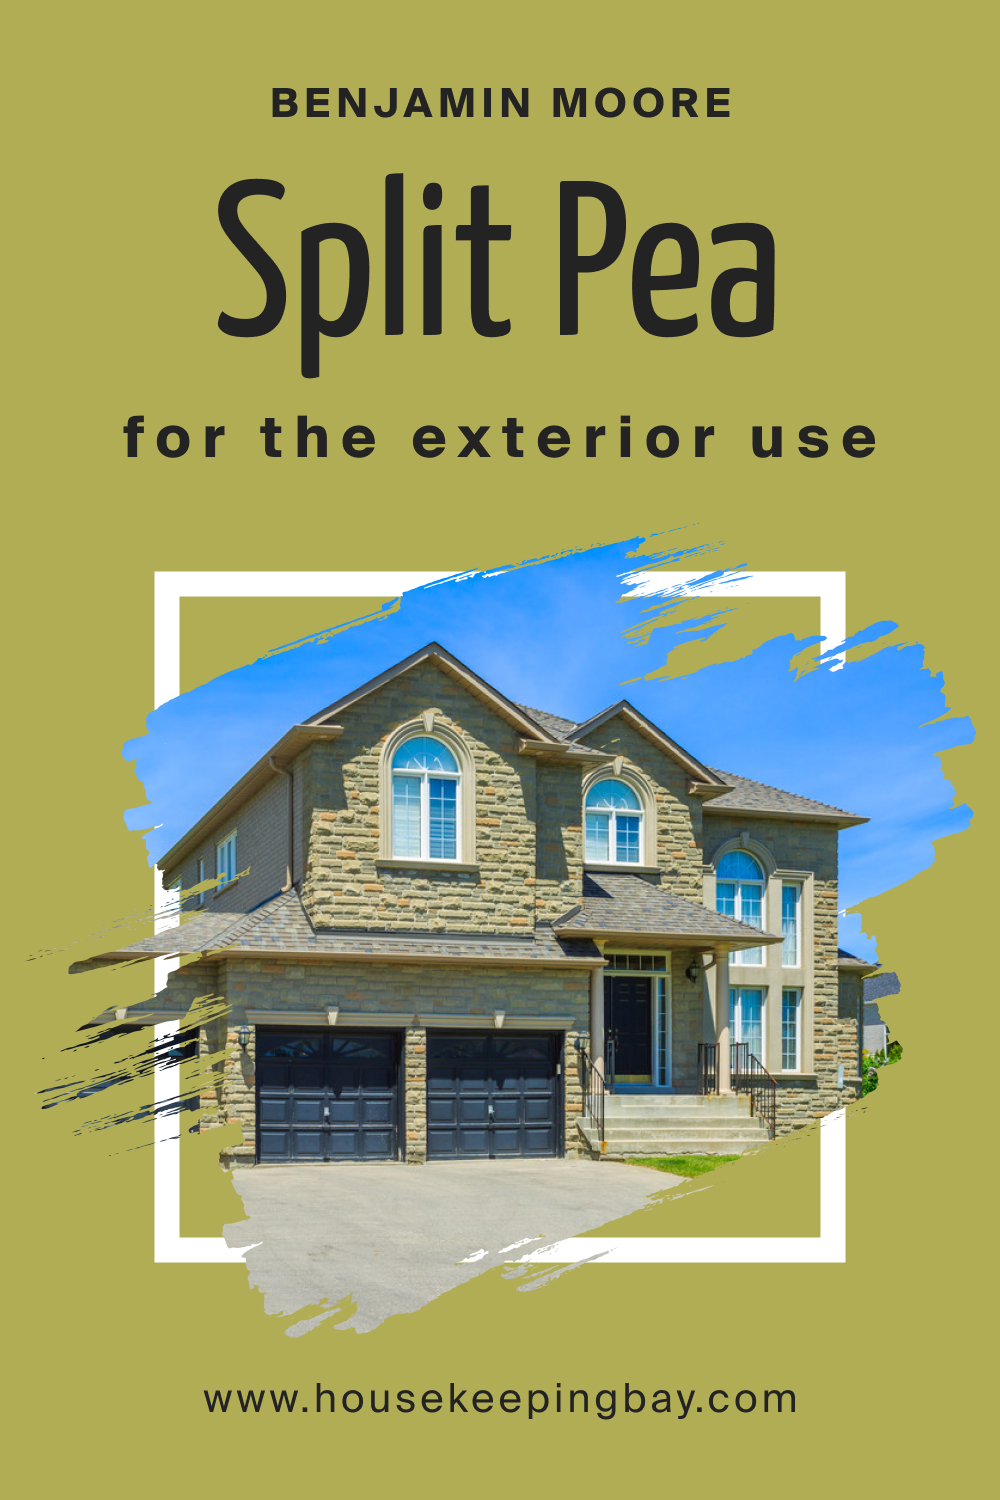 How to Use Split Pea 2146-30 for an Exterior?